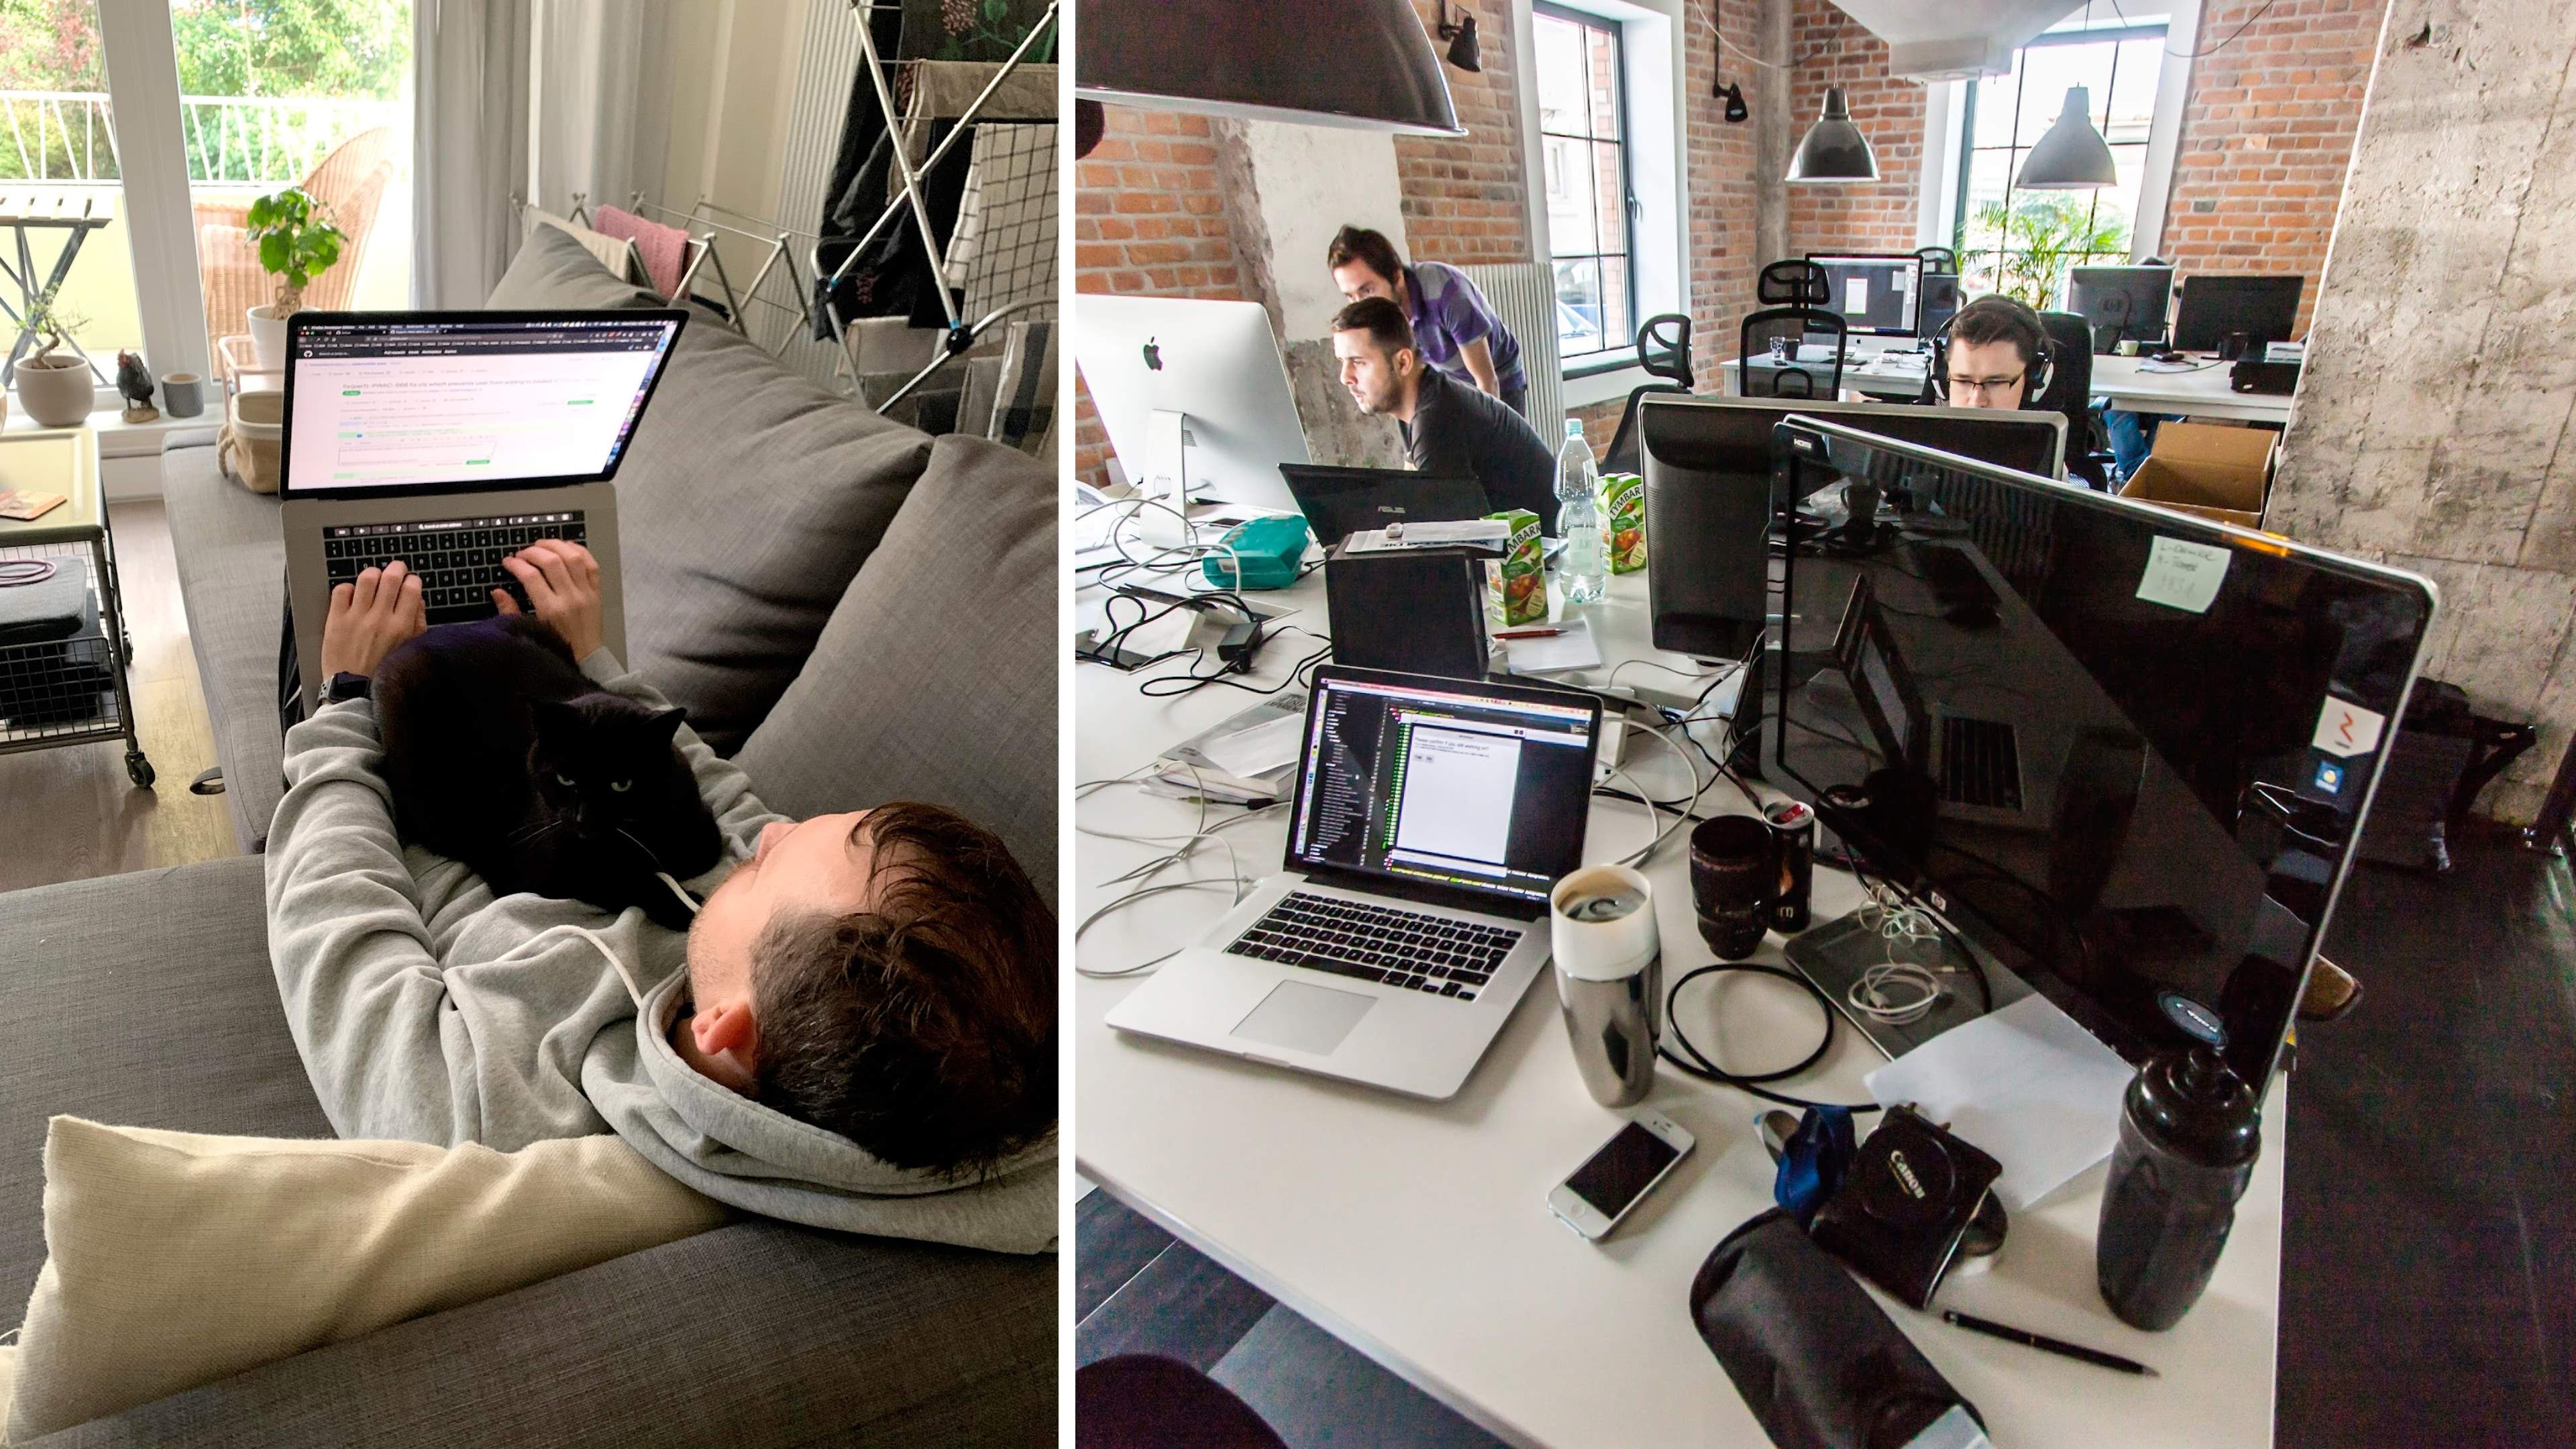 A mashup of two images: working from home with a cat on your lap vs proper 'office' environment